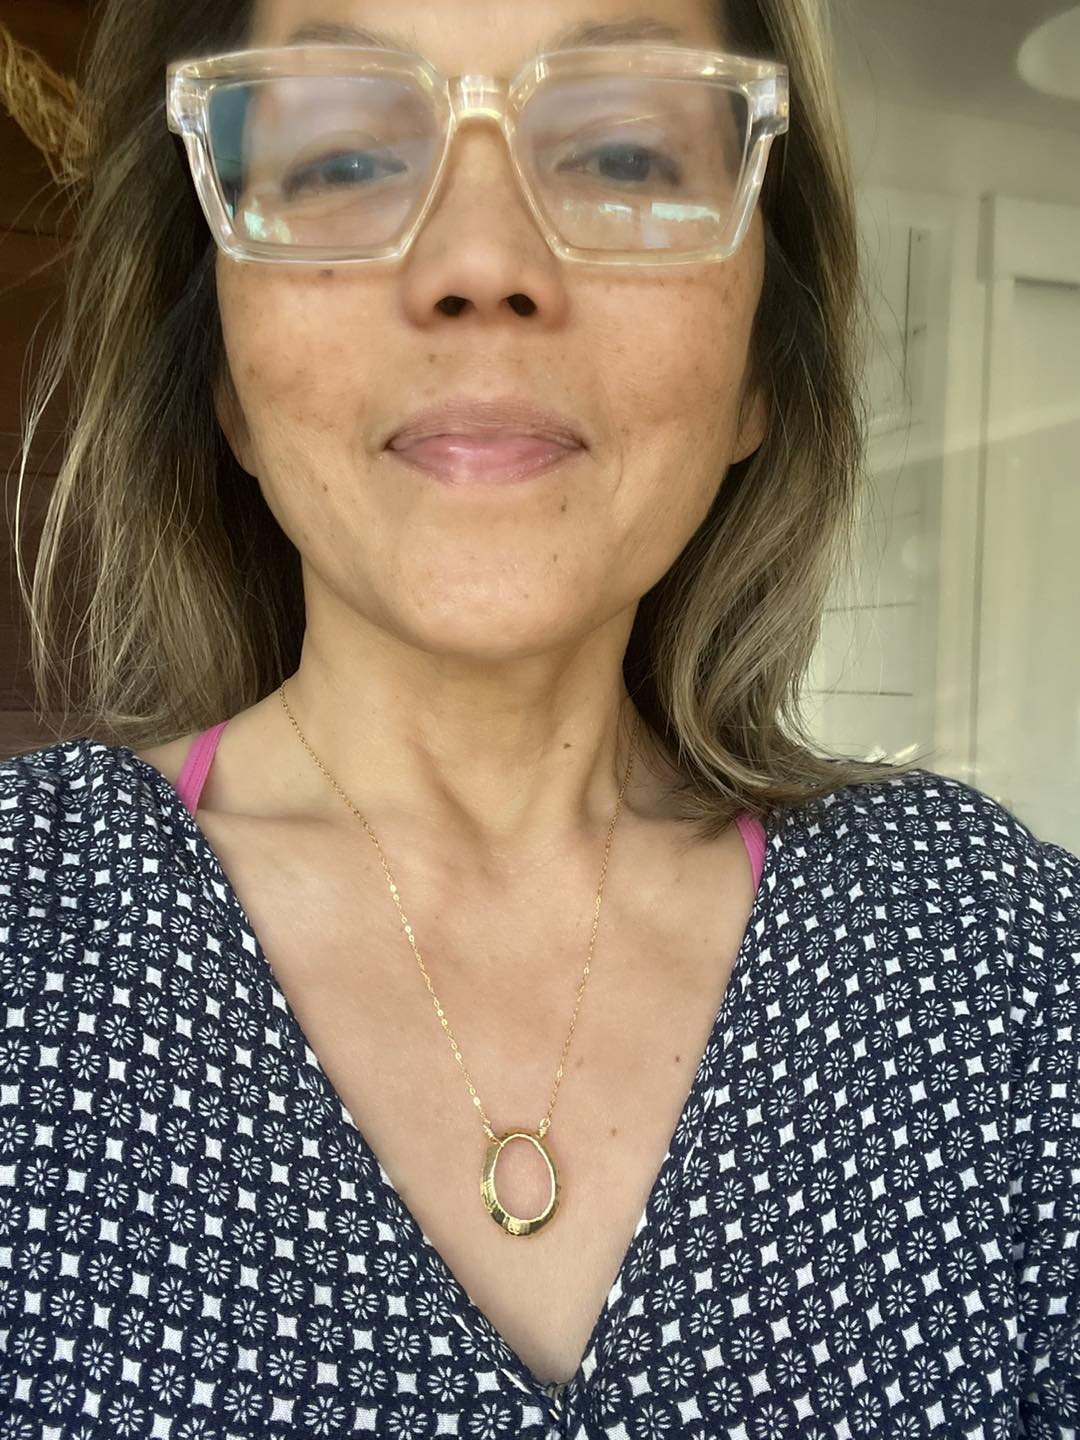 I'm loving this new necklace so much I want to keep it.